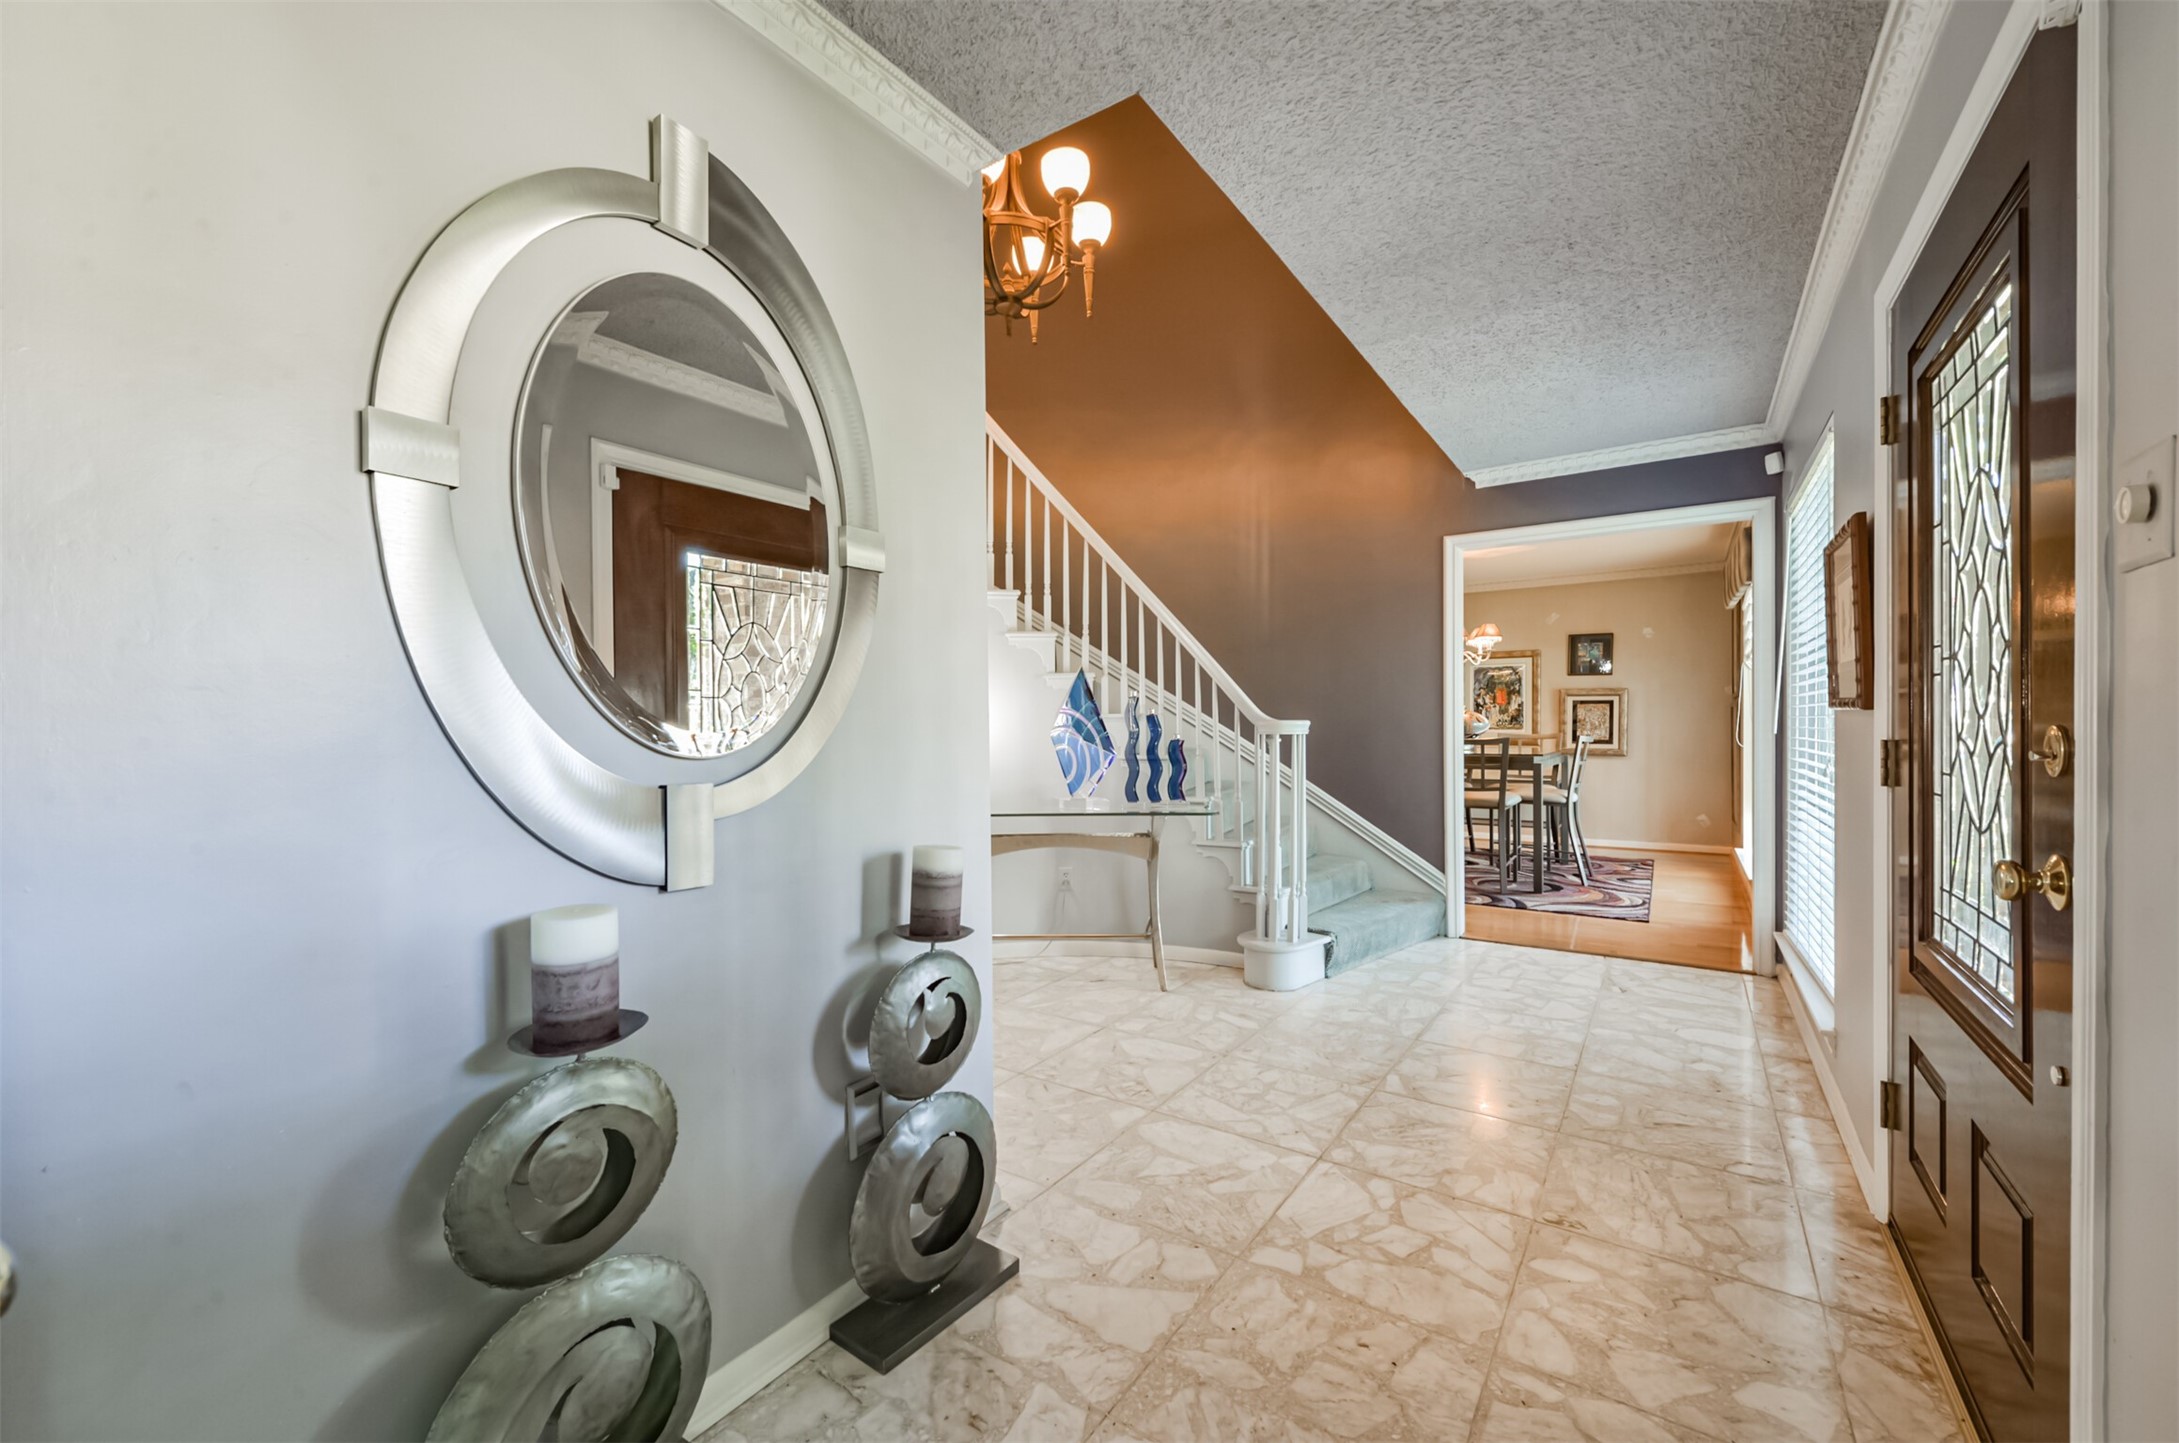 The dining room can be seen through the doors by the stairs. This entry is truly grand and makes a statement about the colorful decorative style of the current owners.